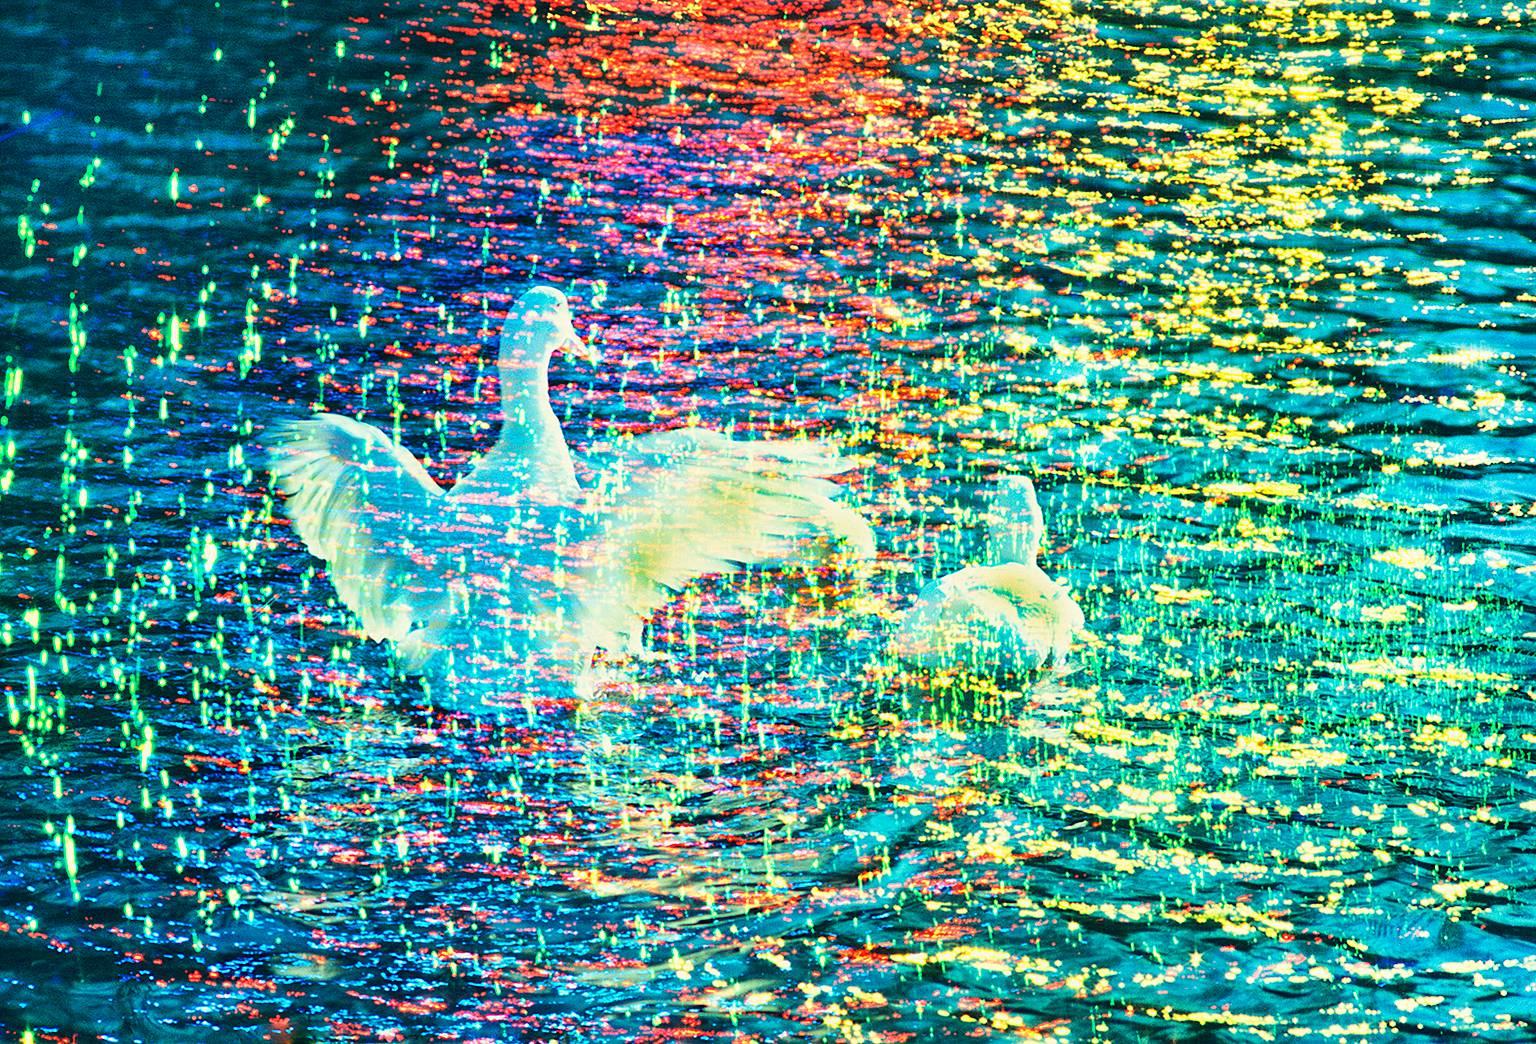 White Ducks in Prism of Color is an early work where a creative color effect  is used to express the  evocative nature of a picturesque nature scene
Signed and dated on lower right, numbered on verso 2/15, Printed Later, Unframed other sizes